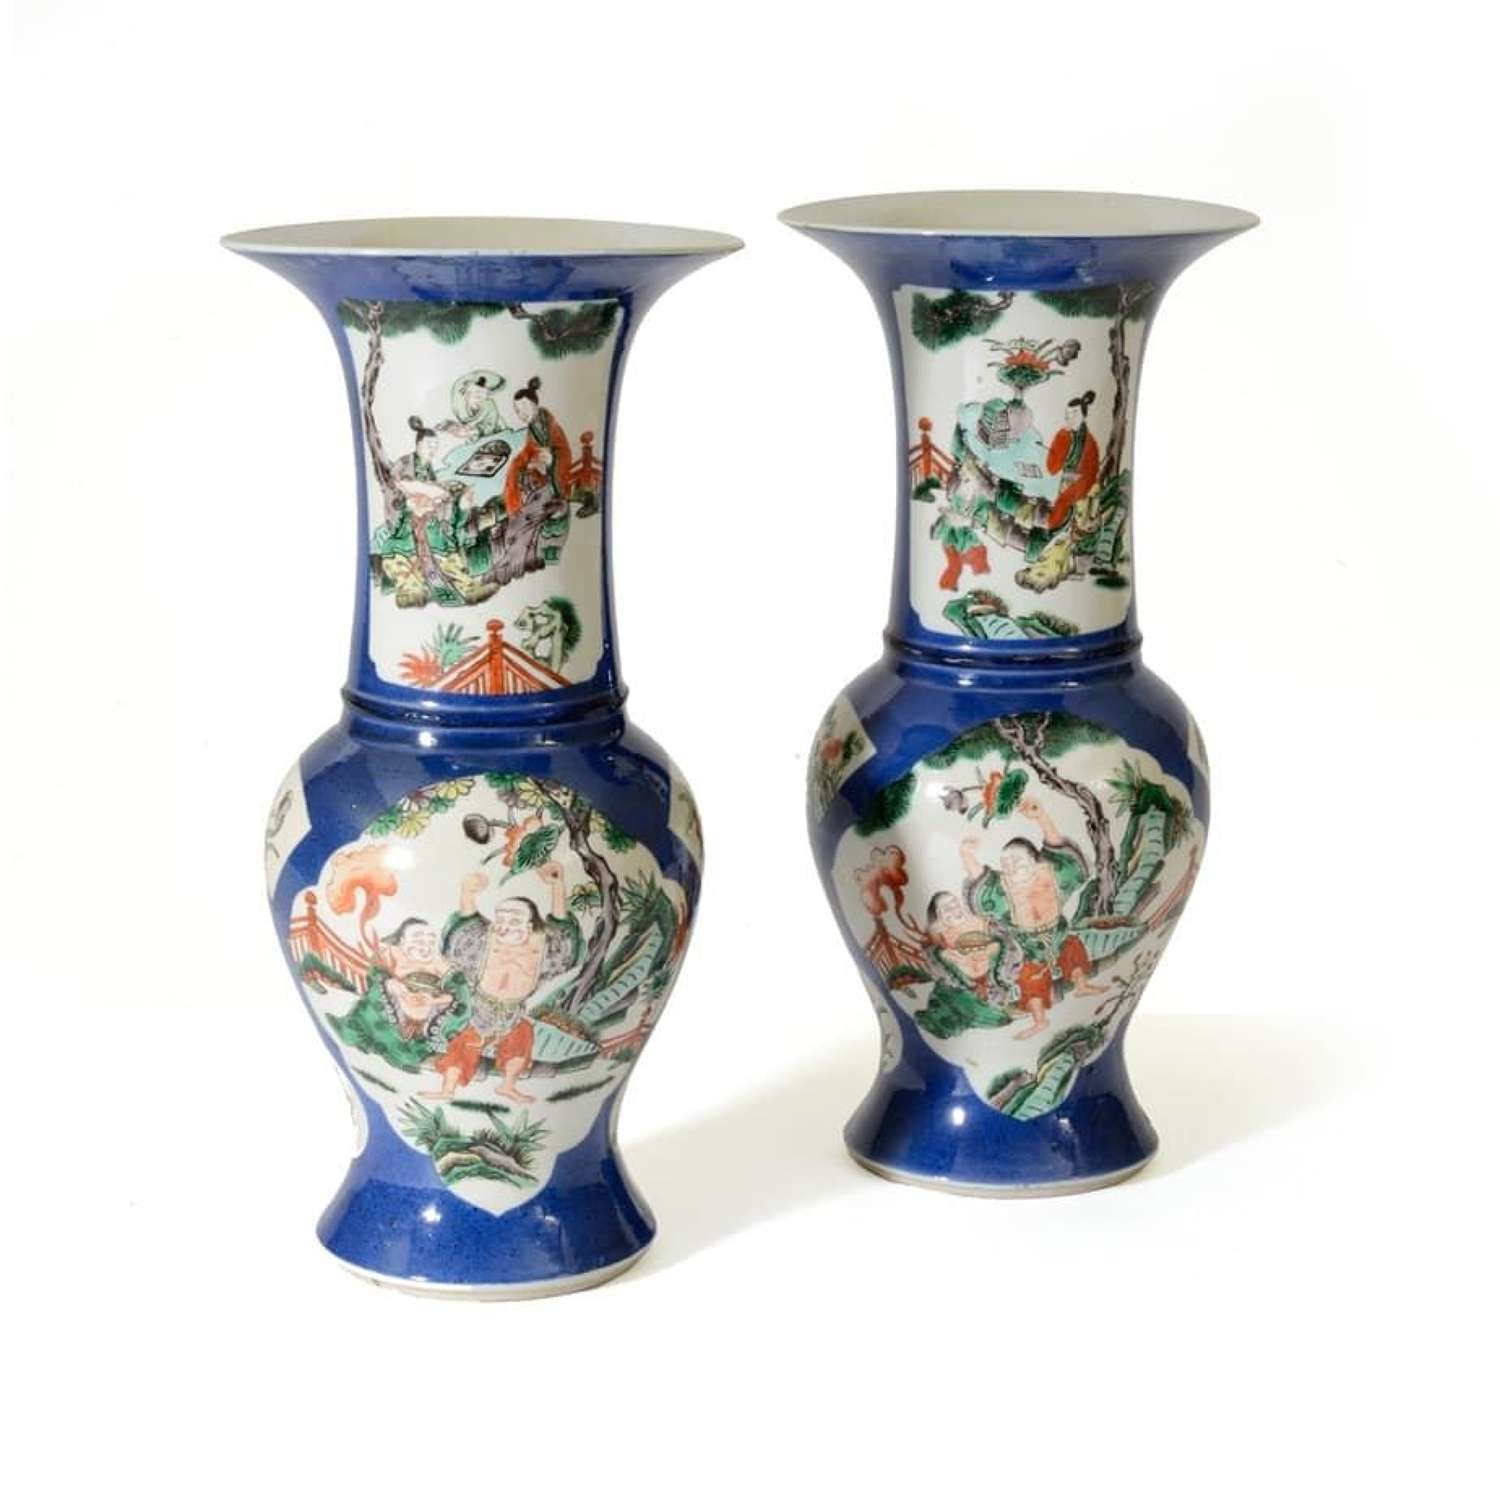 Pair of late 19th Century Chinese Famille Verte vases